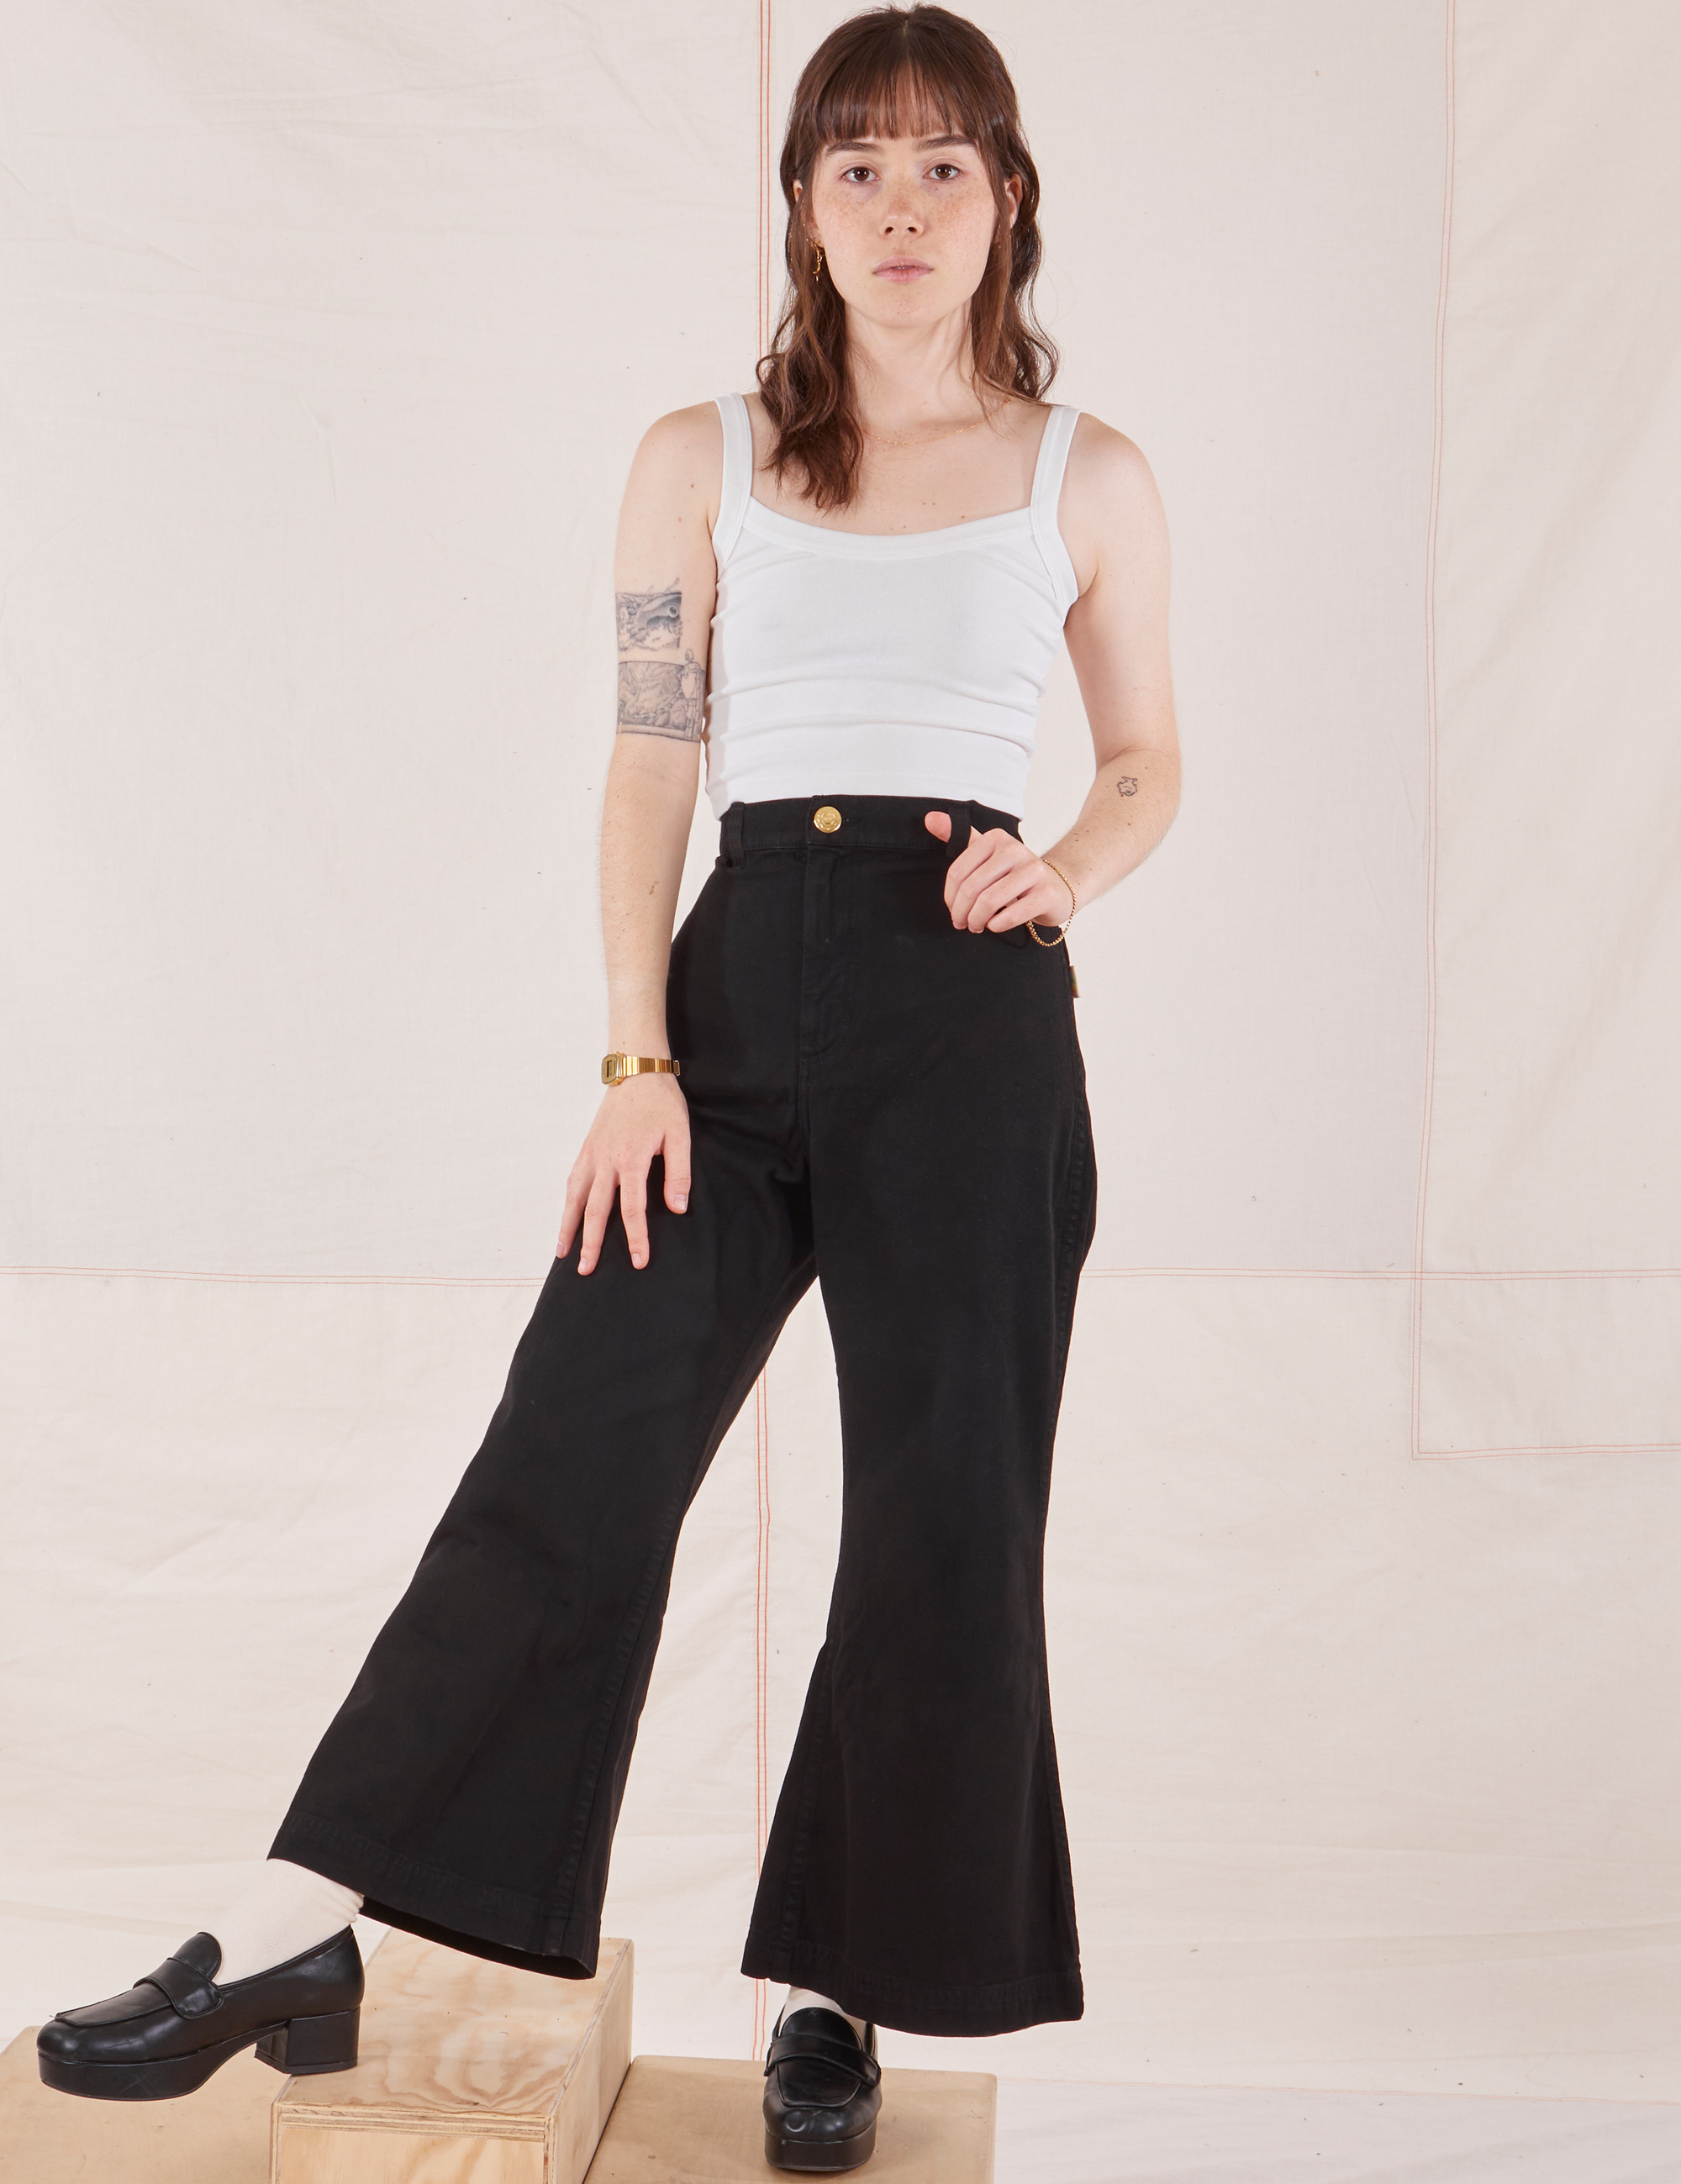 Hana is 5&#39;3&quot; and wearing P Petite Bell Bottoms in Basic Black paired with vintage off-white Cropped cami